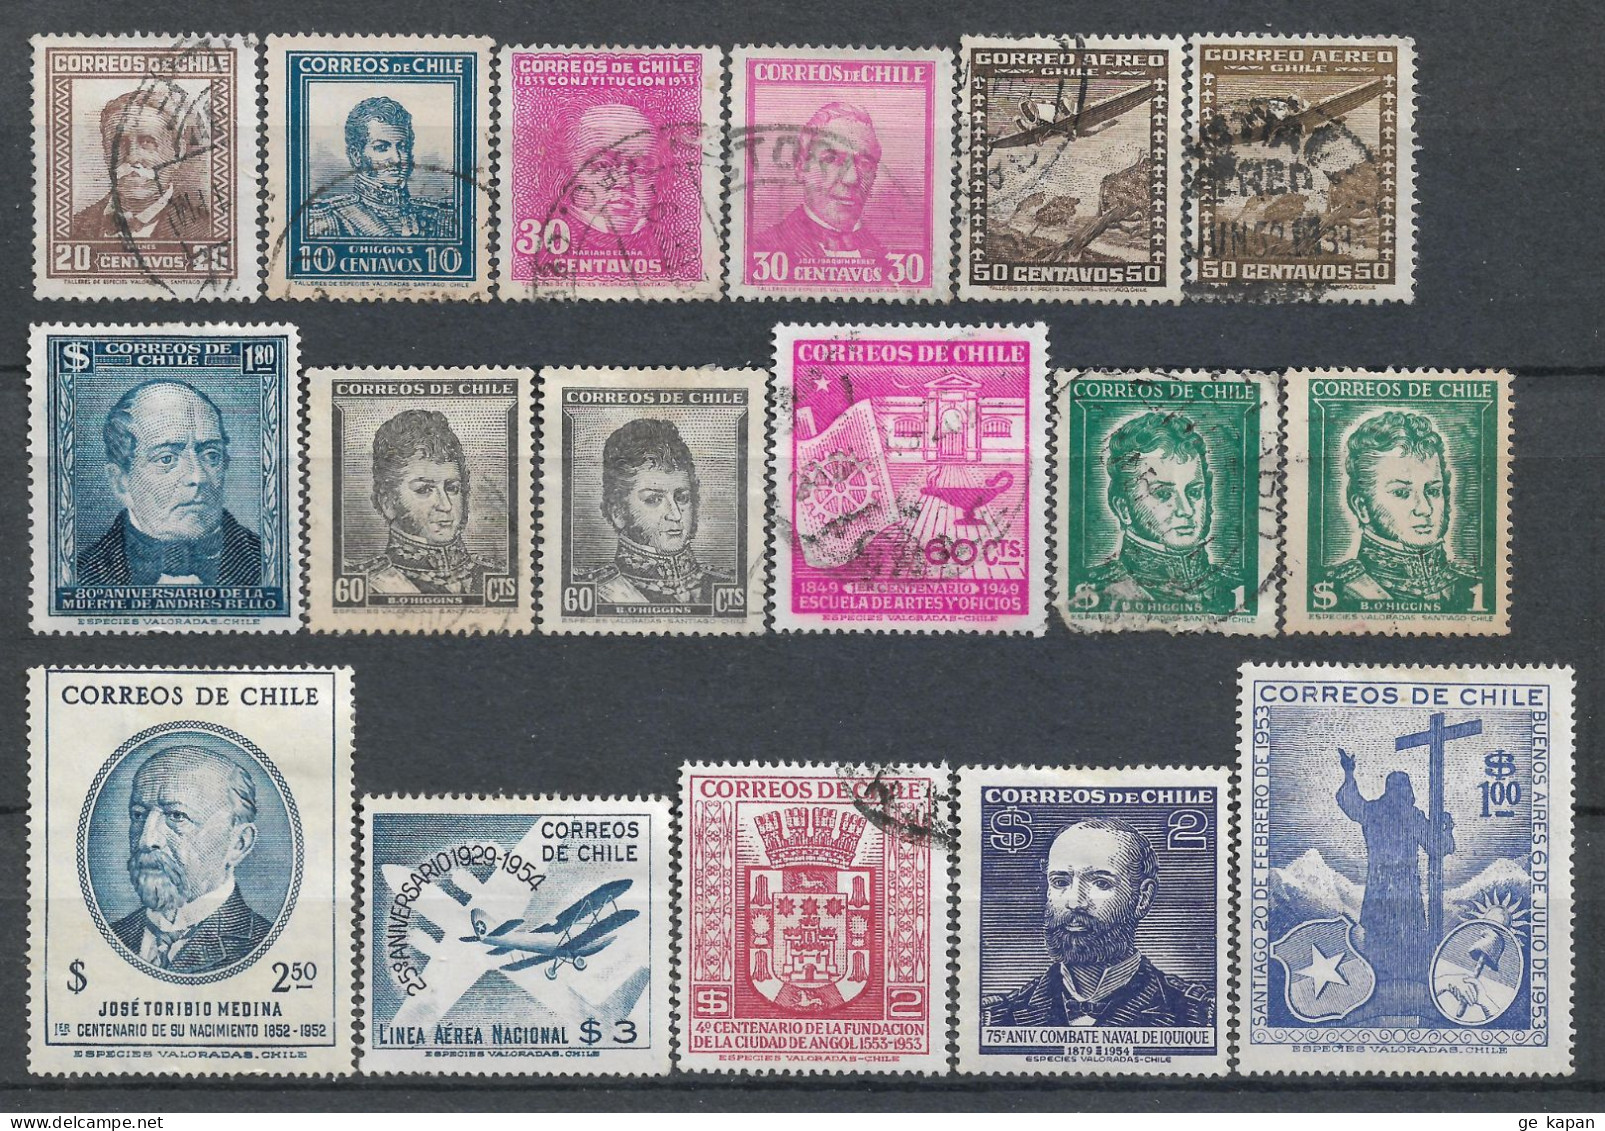 1931-1955 CHILE Set Of 17 Used Stamps (Michel # 186,195,196,198,336,354,360x,440,463x,463y,472,489,490,495,499) CV €4.00 - Cile